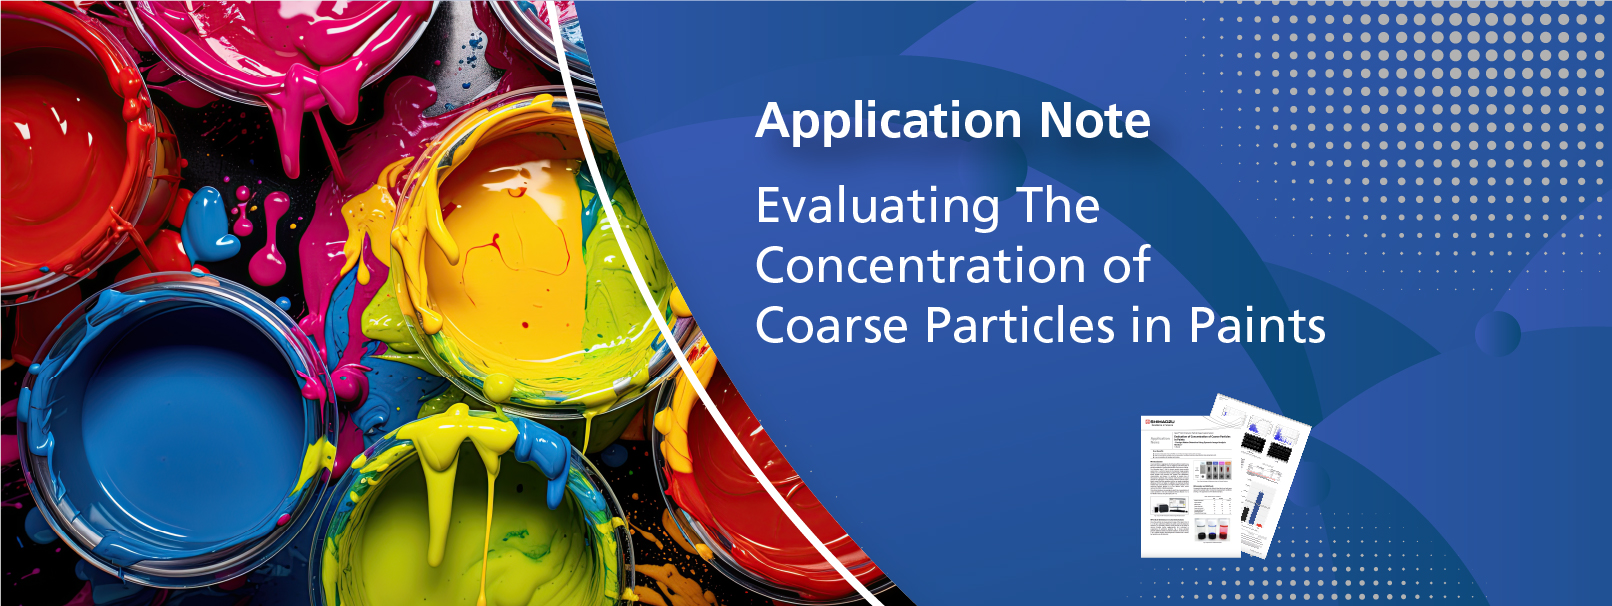 Evaluating the Concentration of Coarse Particles in Paints